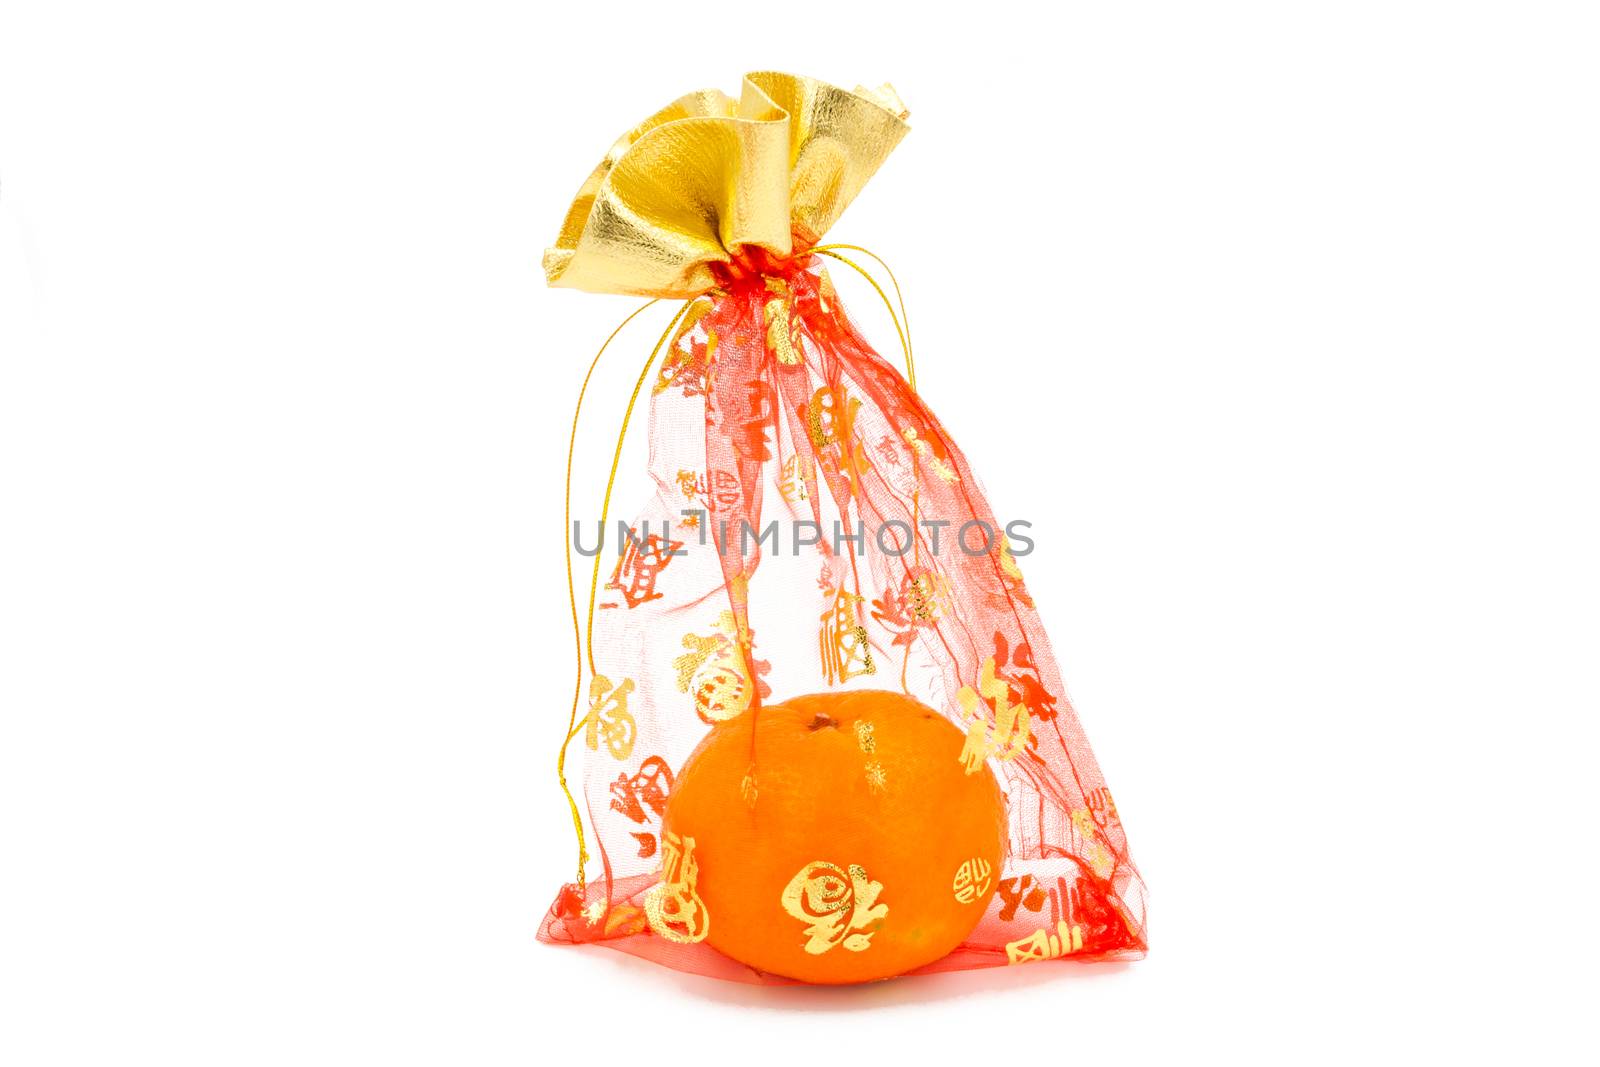 concept image of the chinese new year -mandarin orange in the red auspicious bag